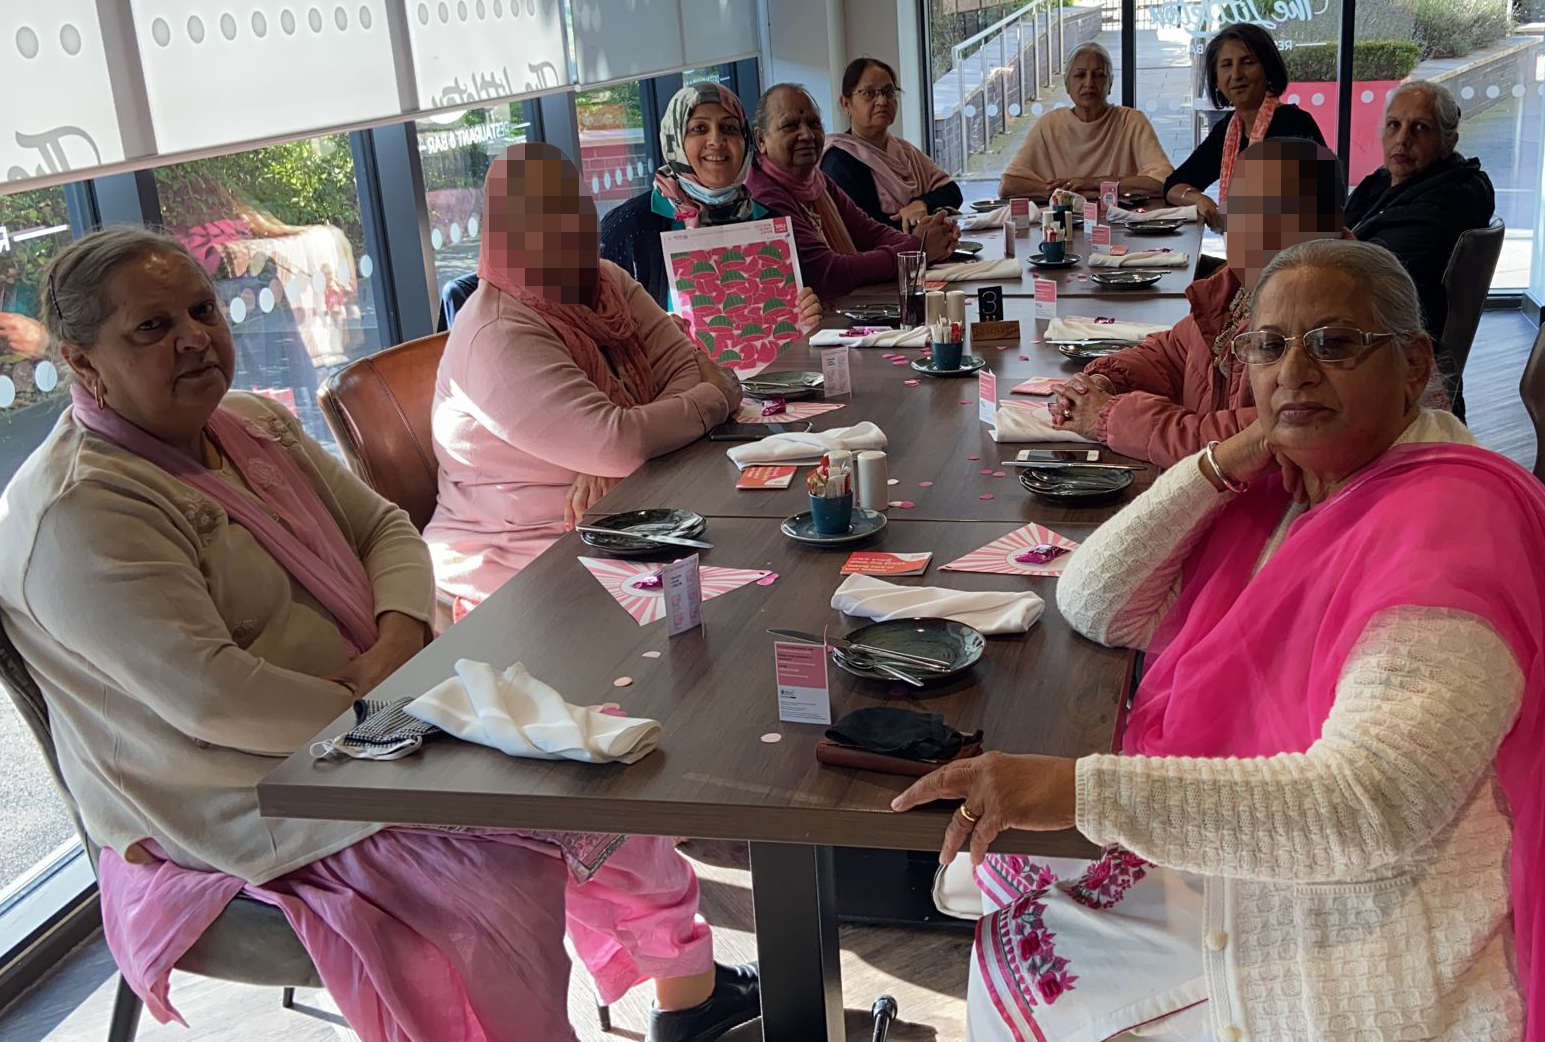 The BME Breast Cancer Support Group